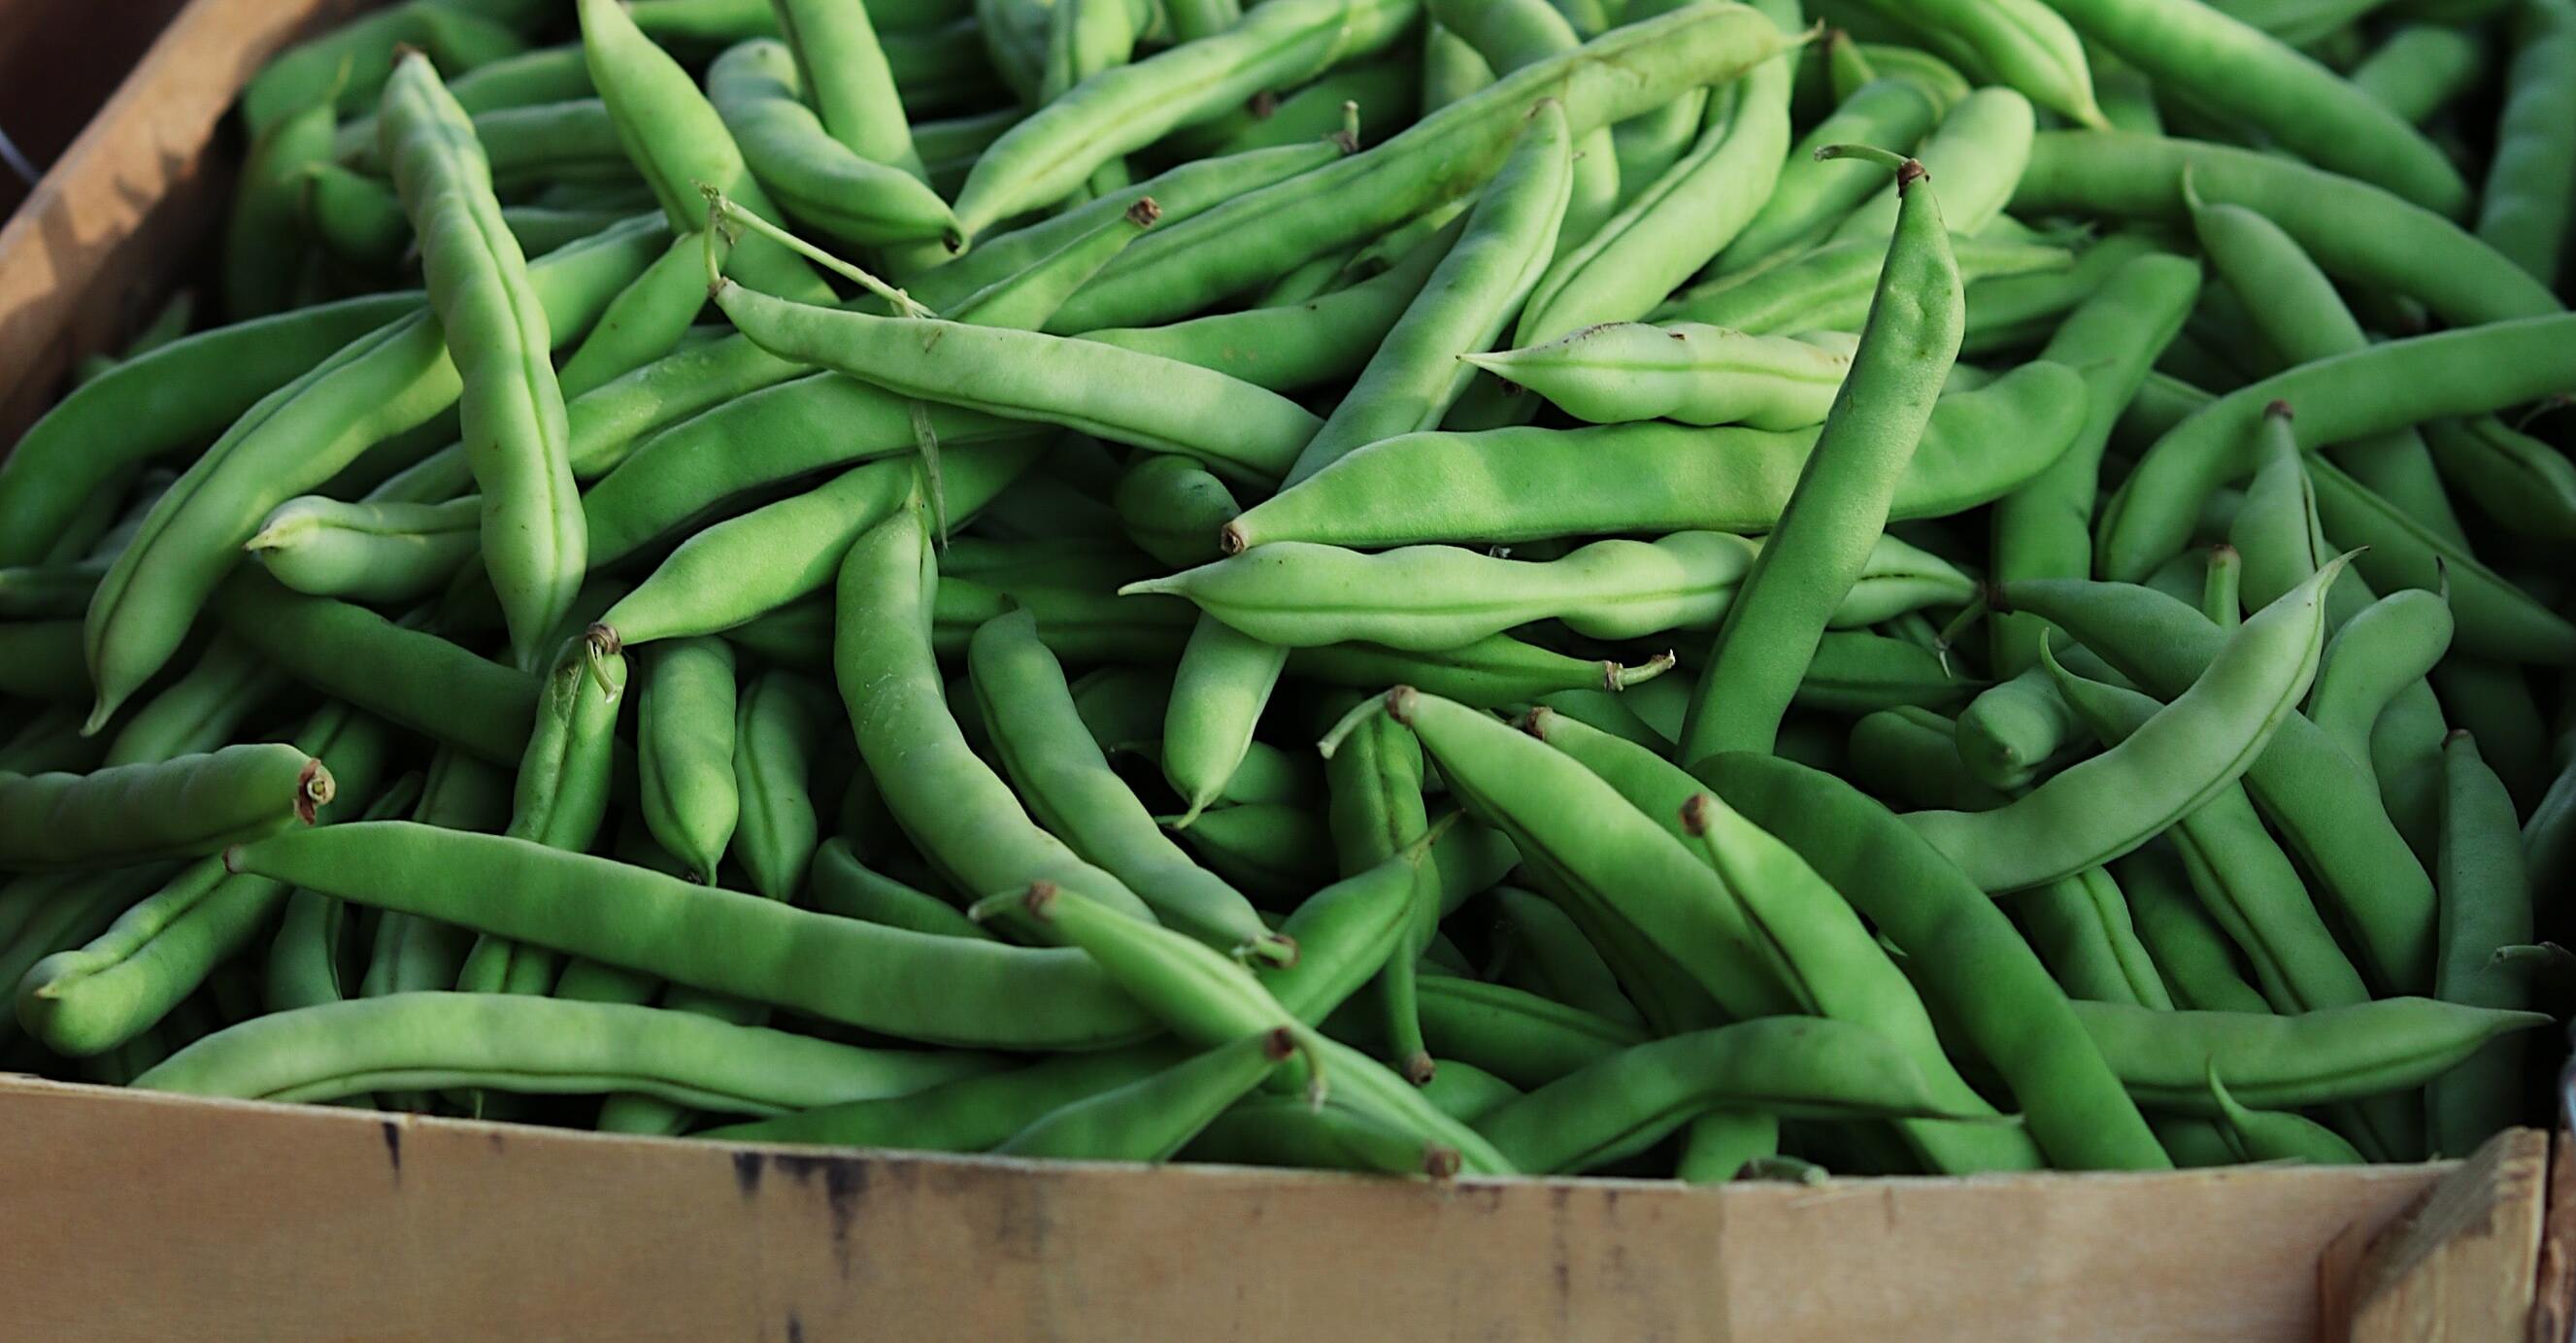 An agricultural company from Barnaul shipped dried peas to Korea